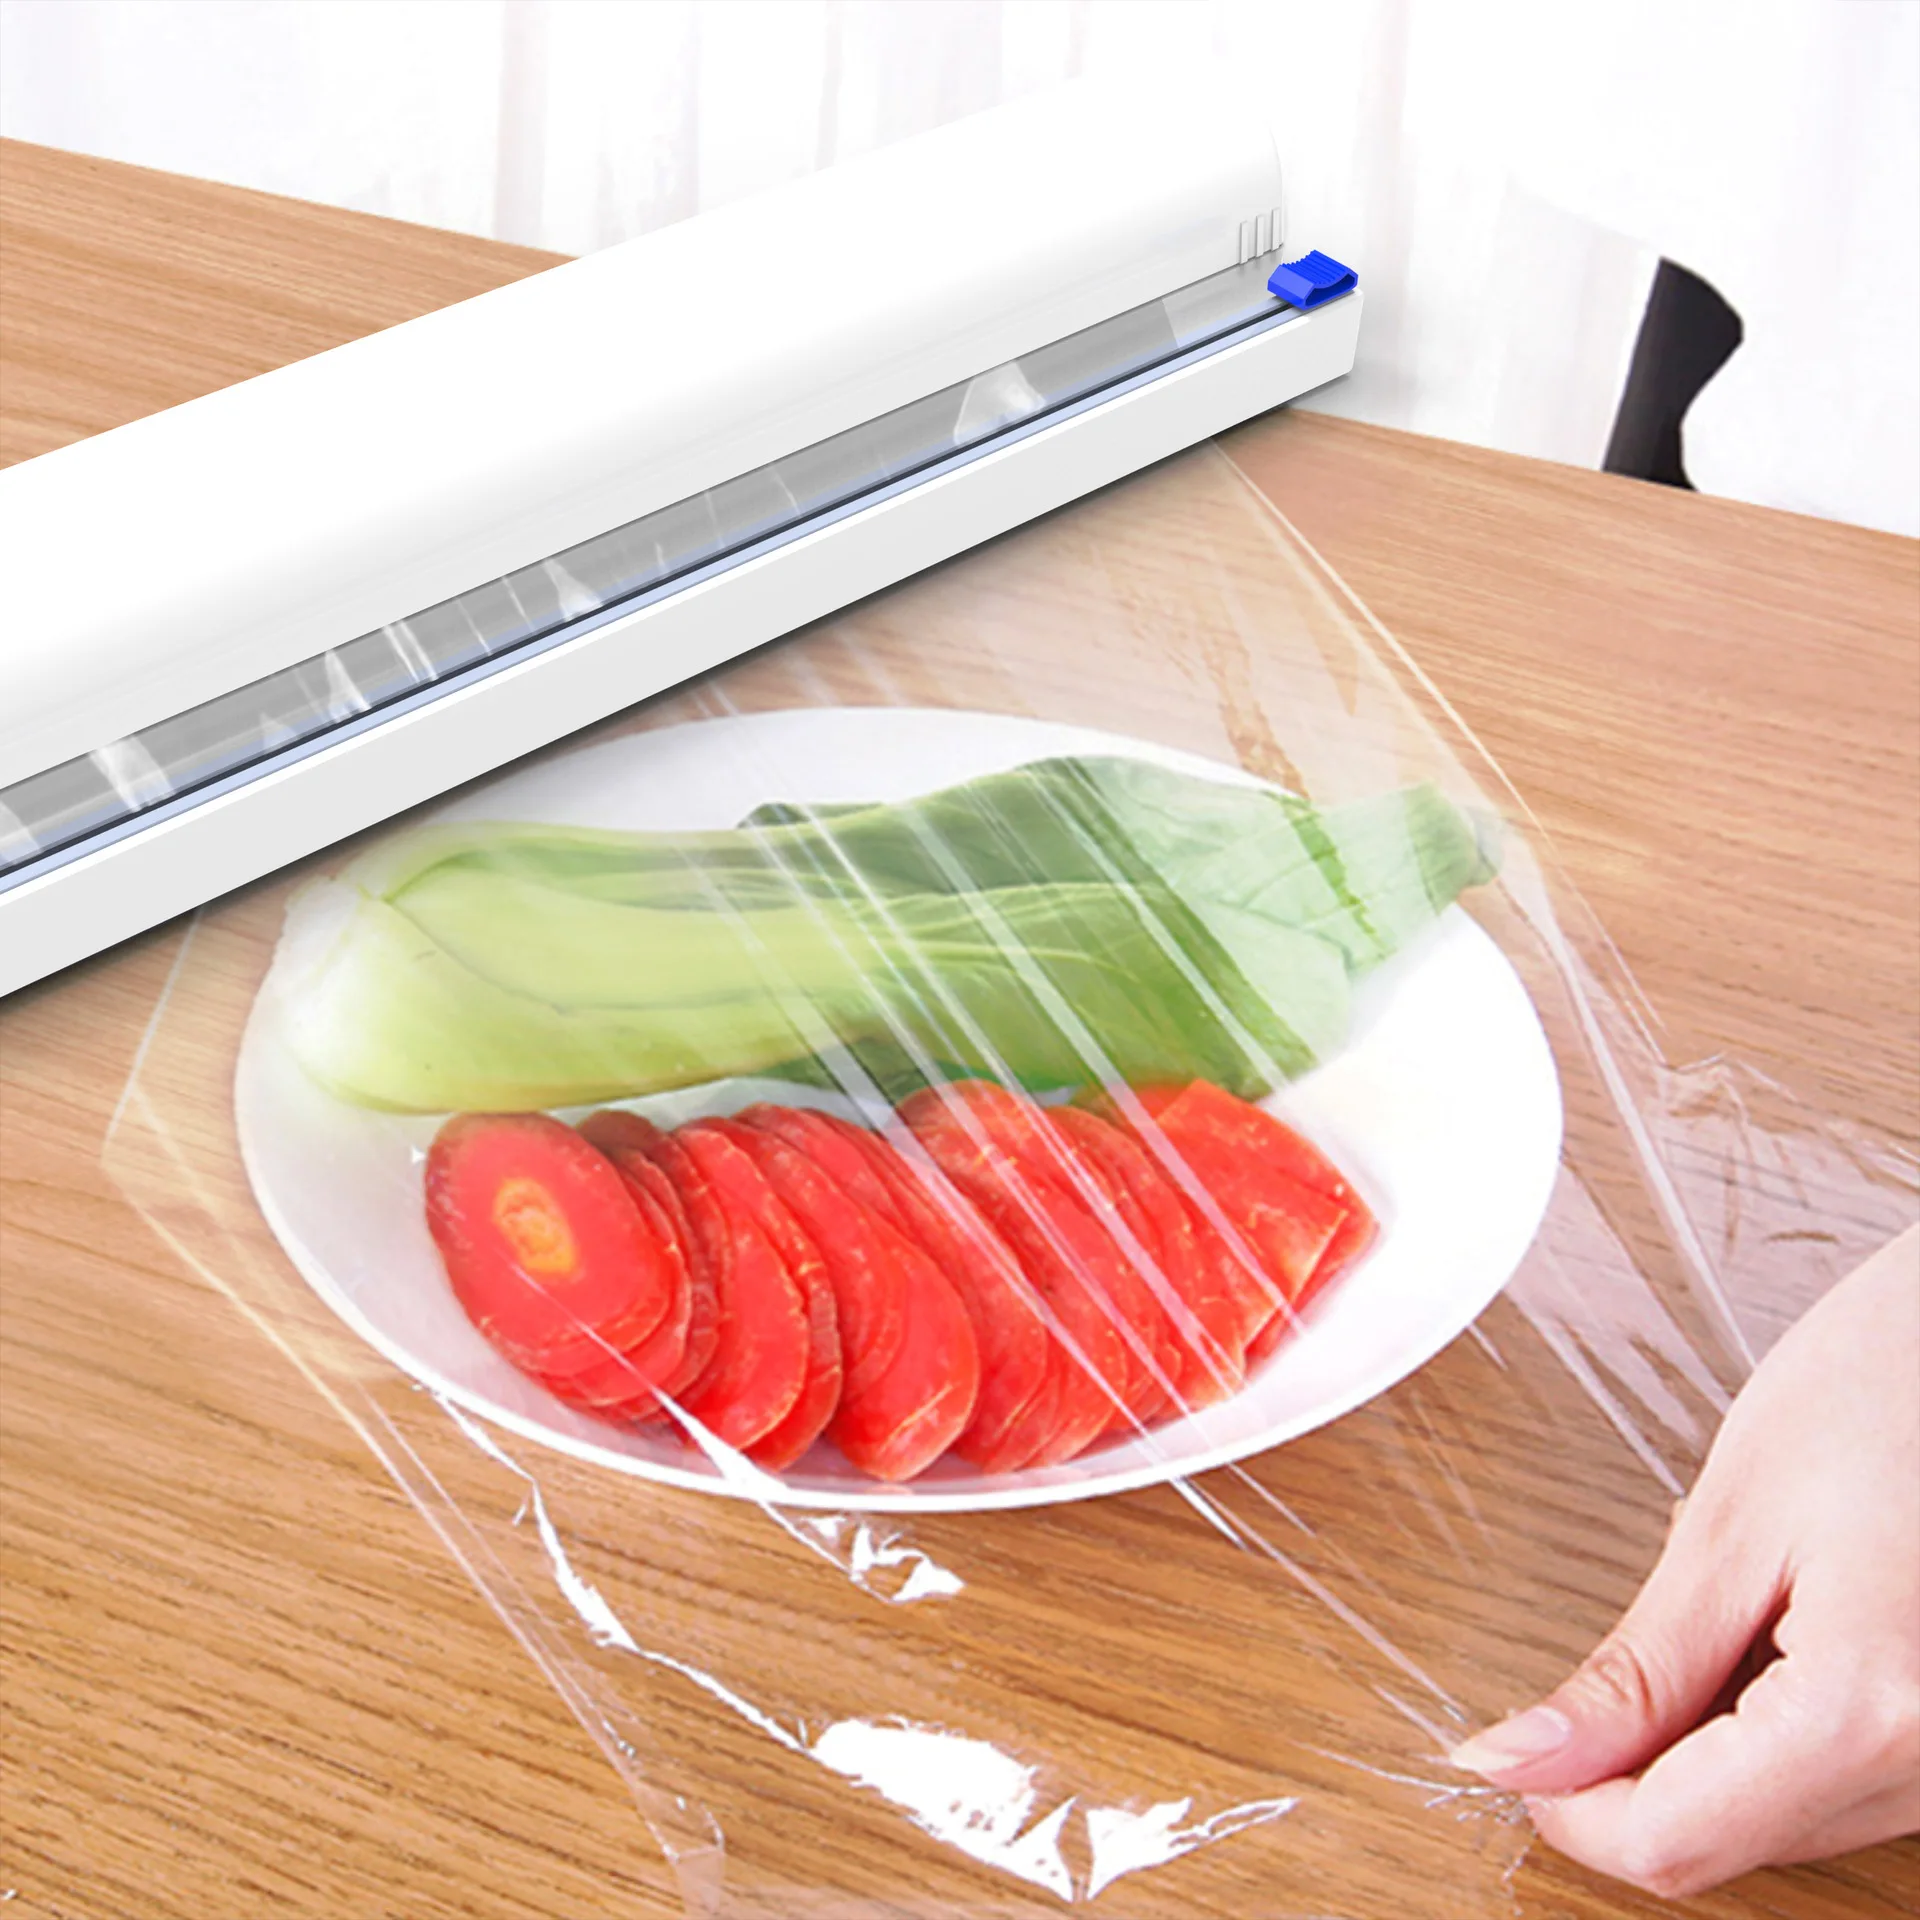 

Food Wrap Plastic Food Packaging Cling Film Cutter Pe Cling Film Slider Cutter Amazon Top Seller 2021 Kitchen, White or customized